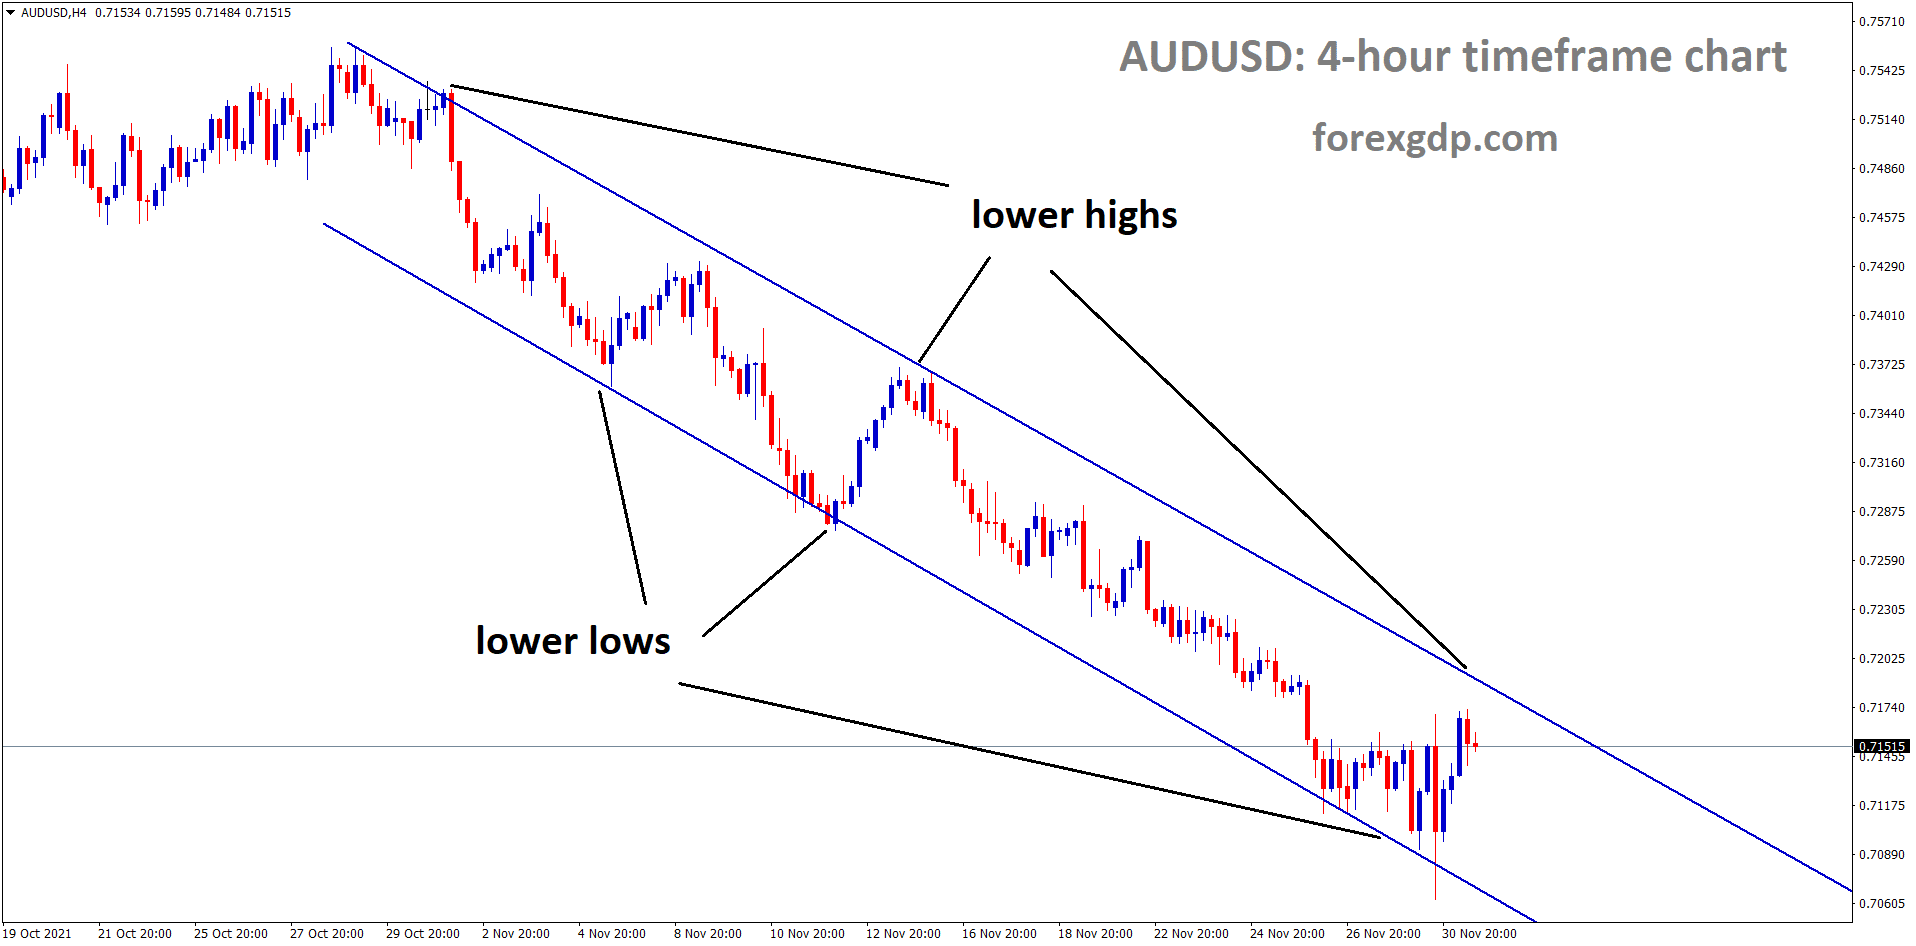 AUDUSD is moving in the Descending channel and market consolidated at the lower high area of the channel